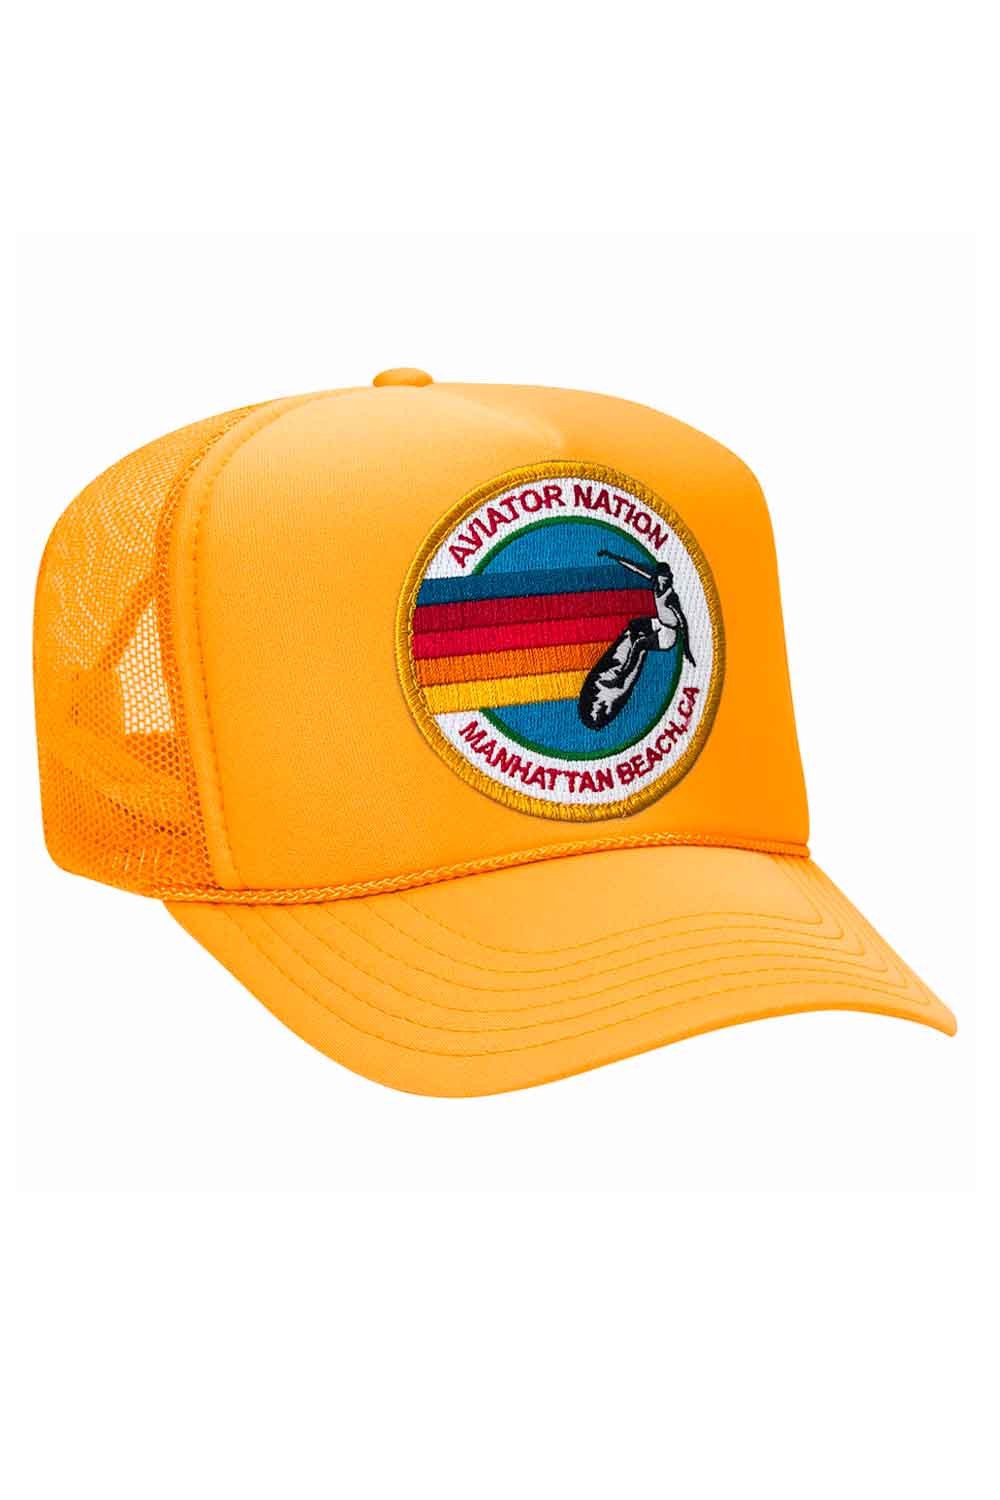 Made in the USA - Mens Colorful Vintage Caribbean Beach Hat- Mens